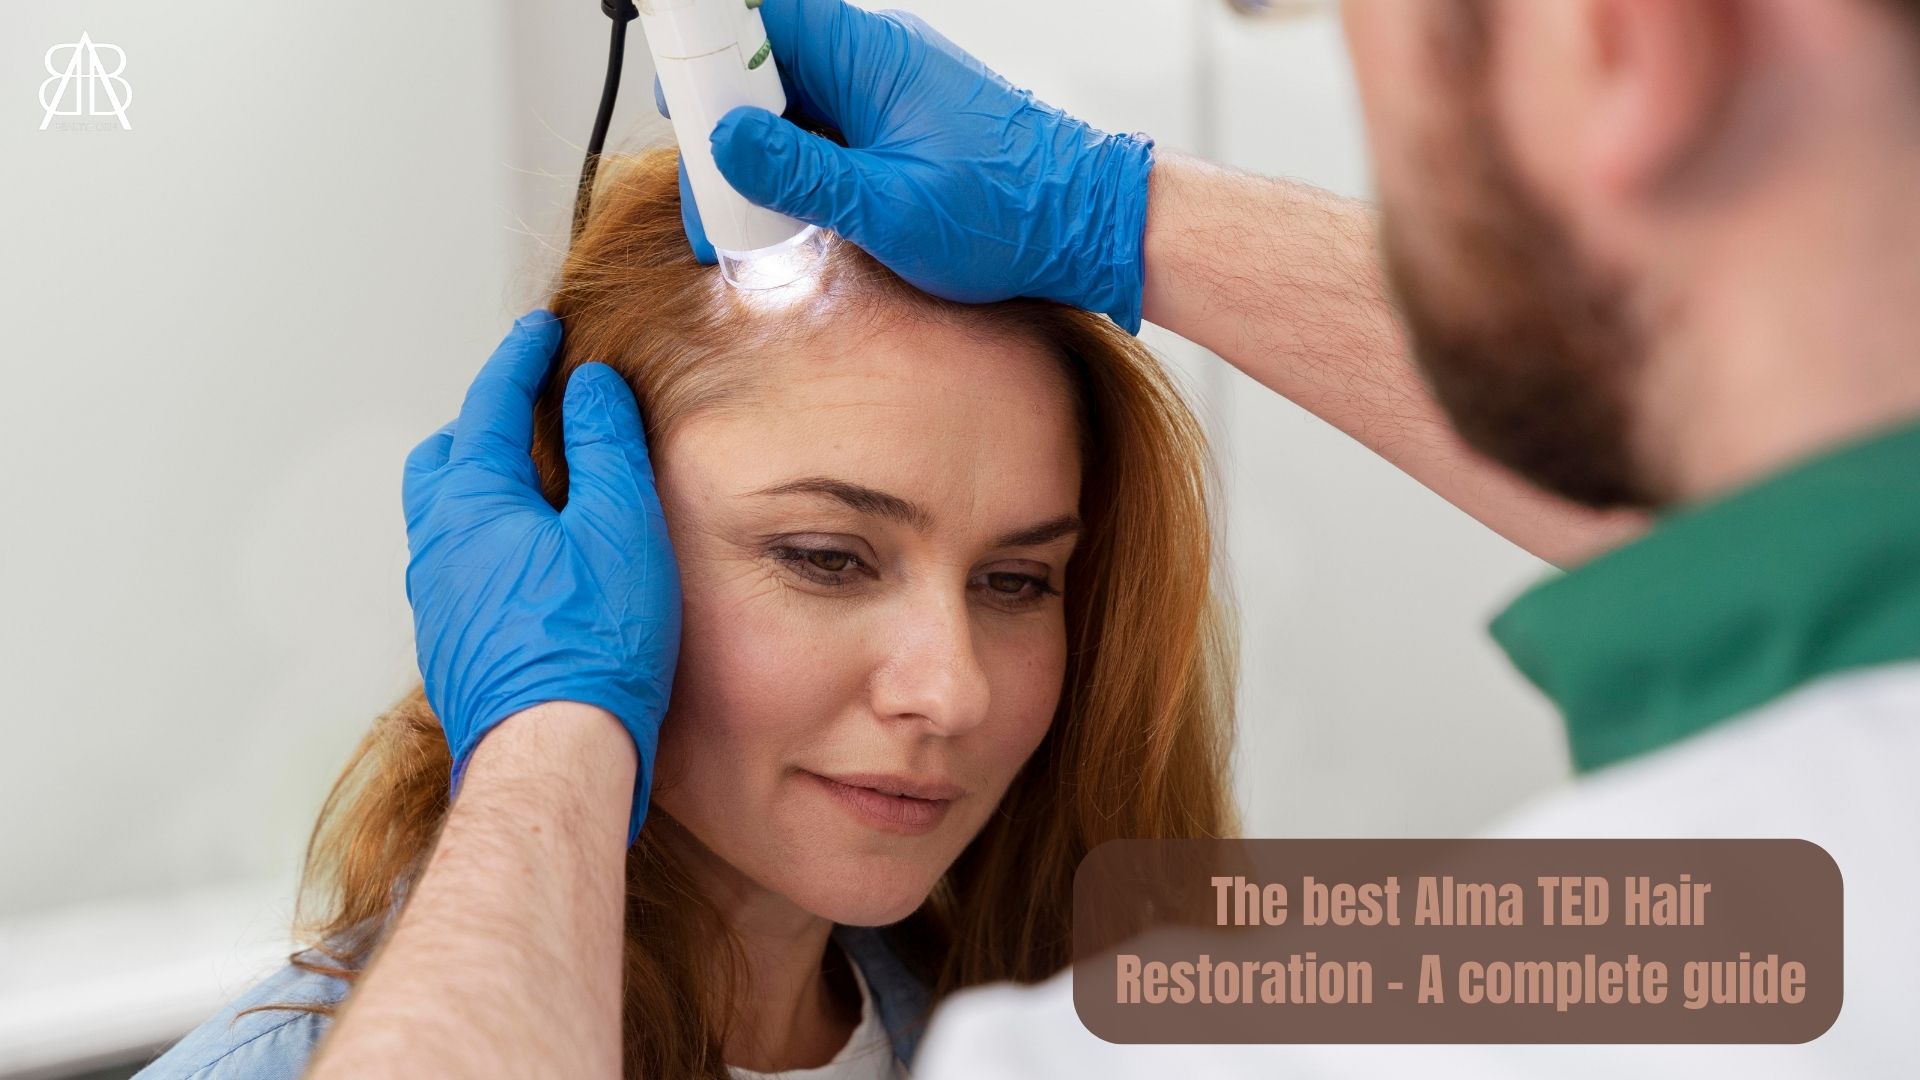 You are currently viewing THE BEST ALMA TED HAIR RESTORATION – A COMPLETE GUIDE! BEAUTYBORN MEDSPA, WHERE TIMELESS BEAUTY IS BORN. PHOENIX, AZ 85016, US.